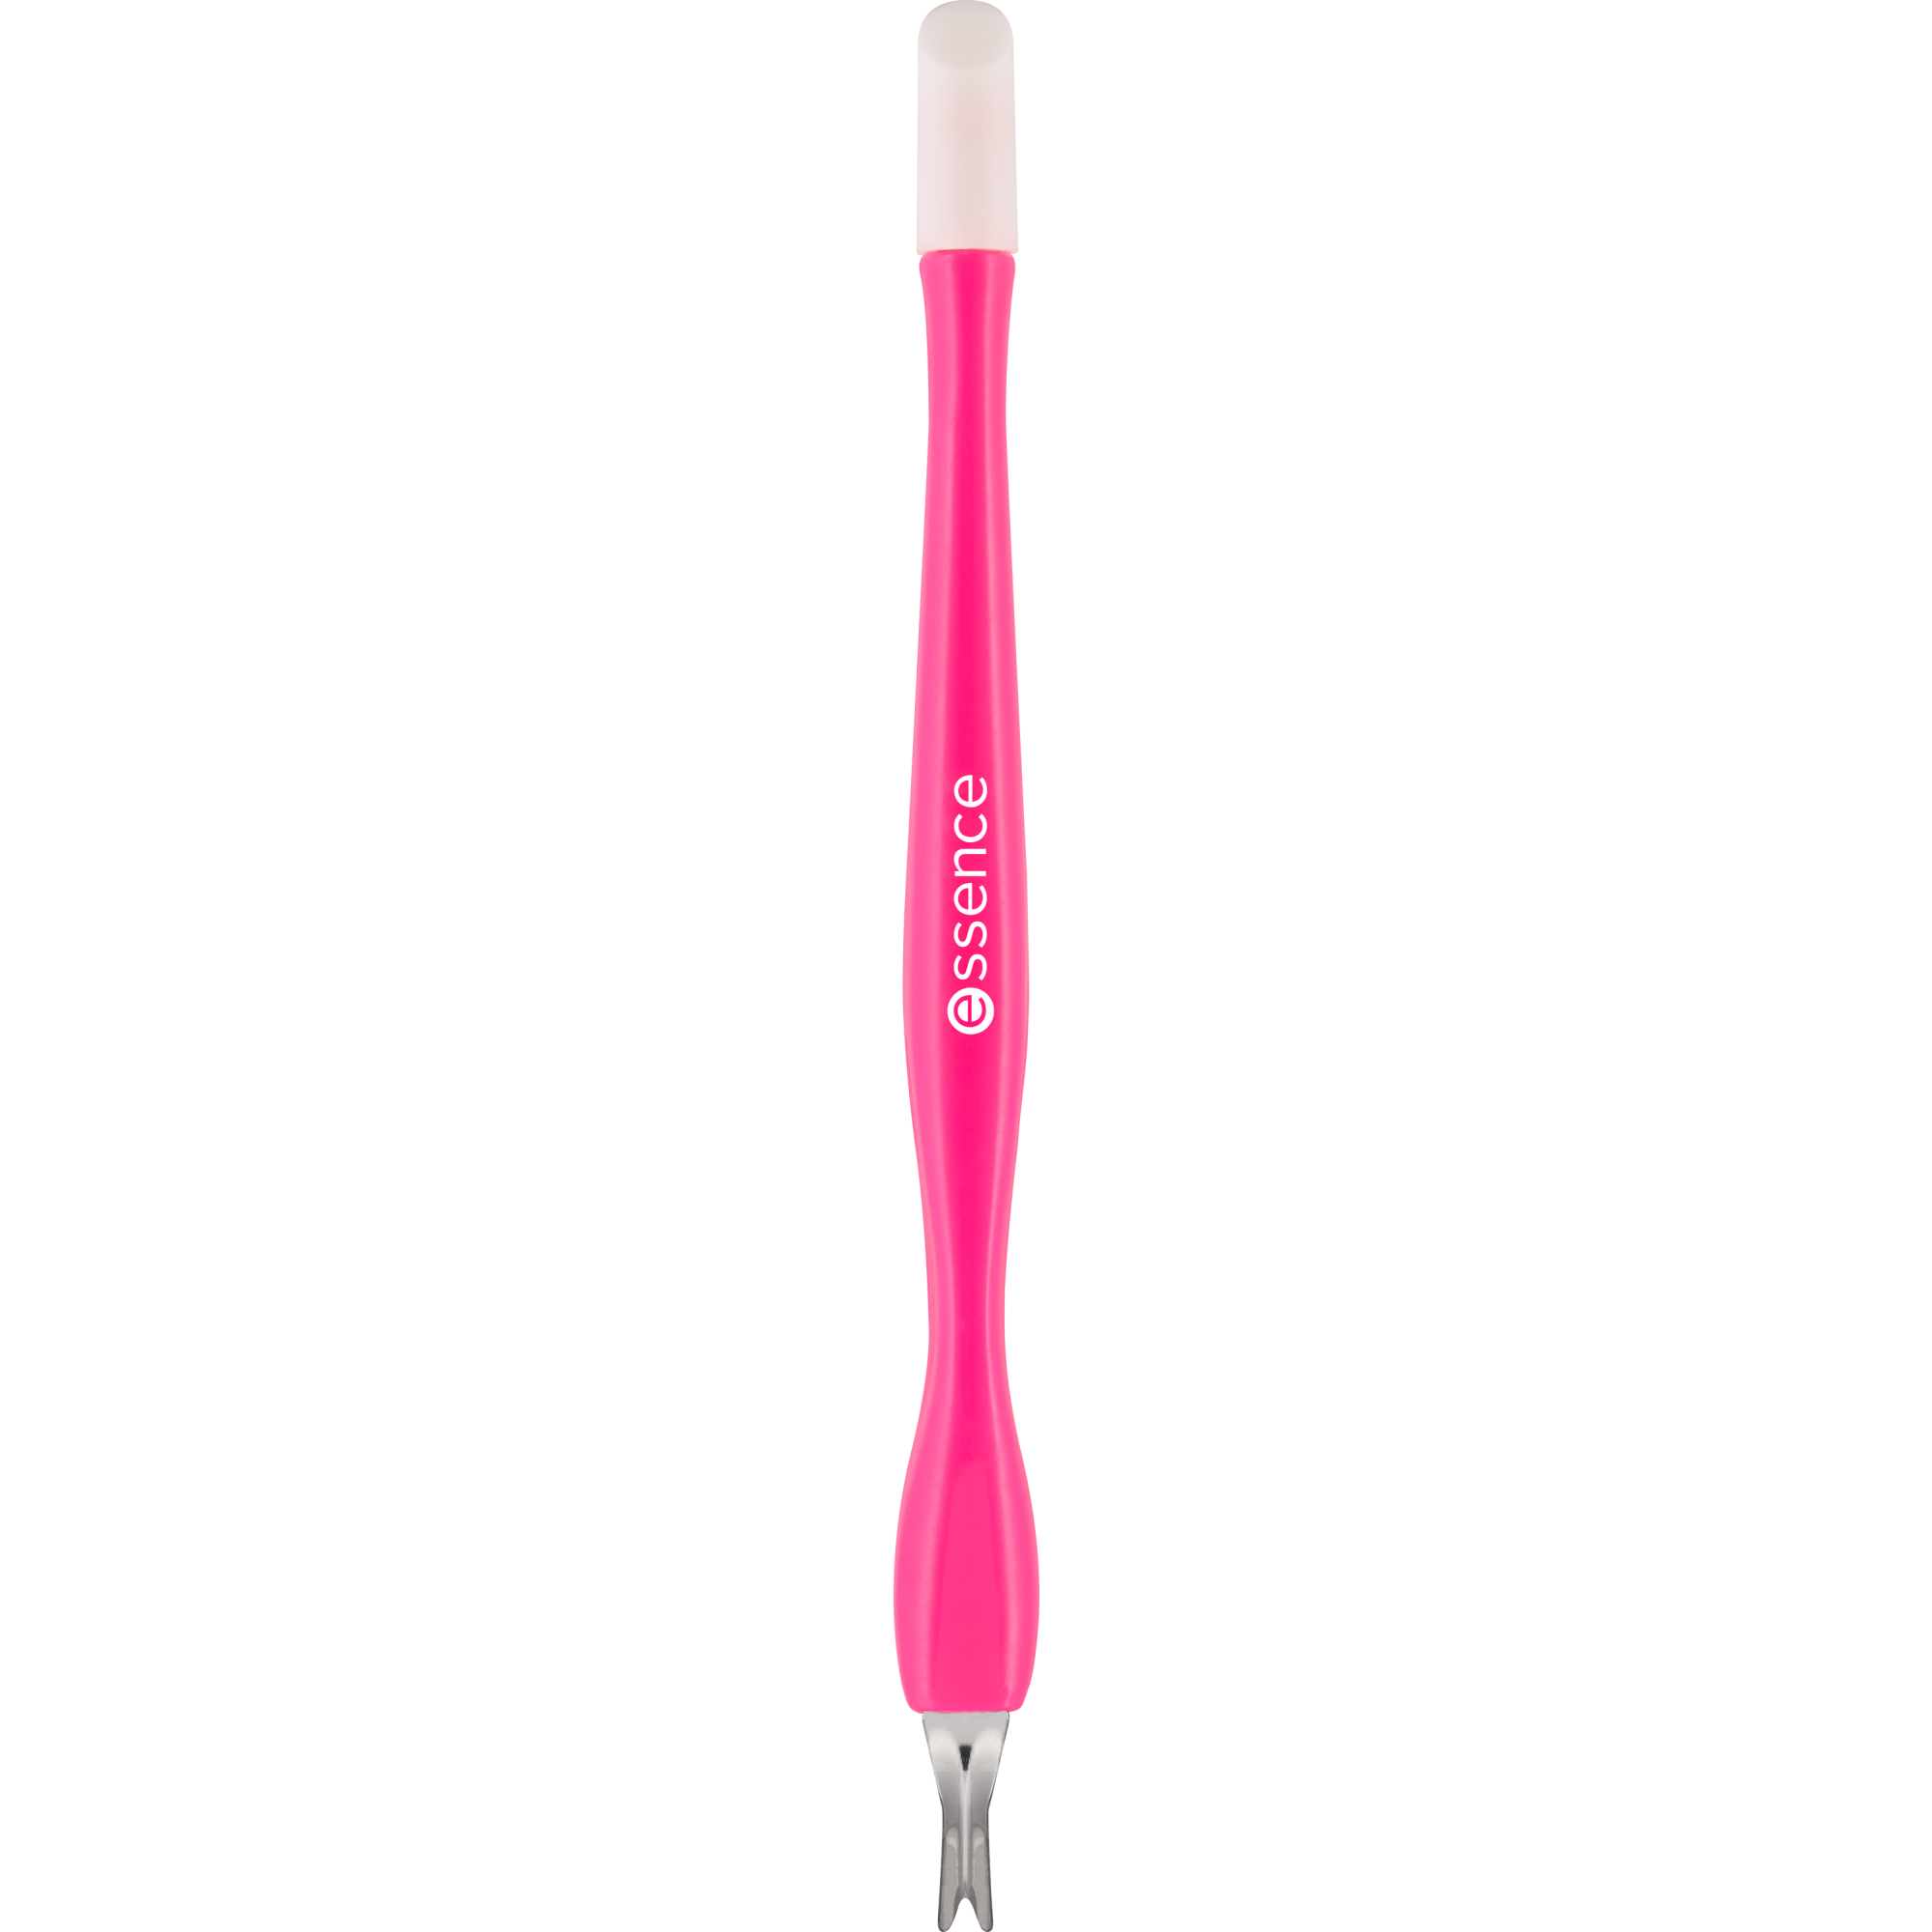 THE CUTICLE TRIMMER